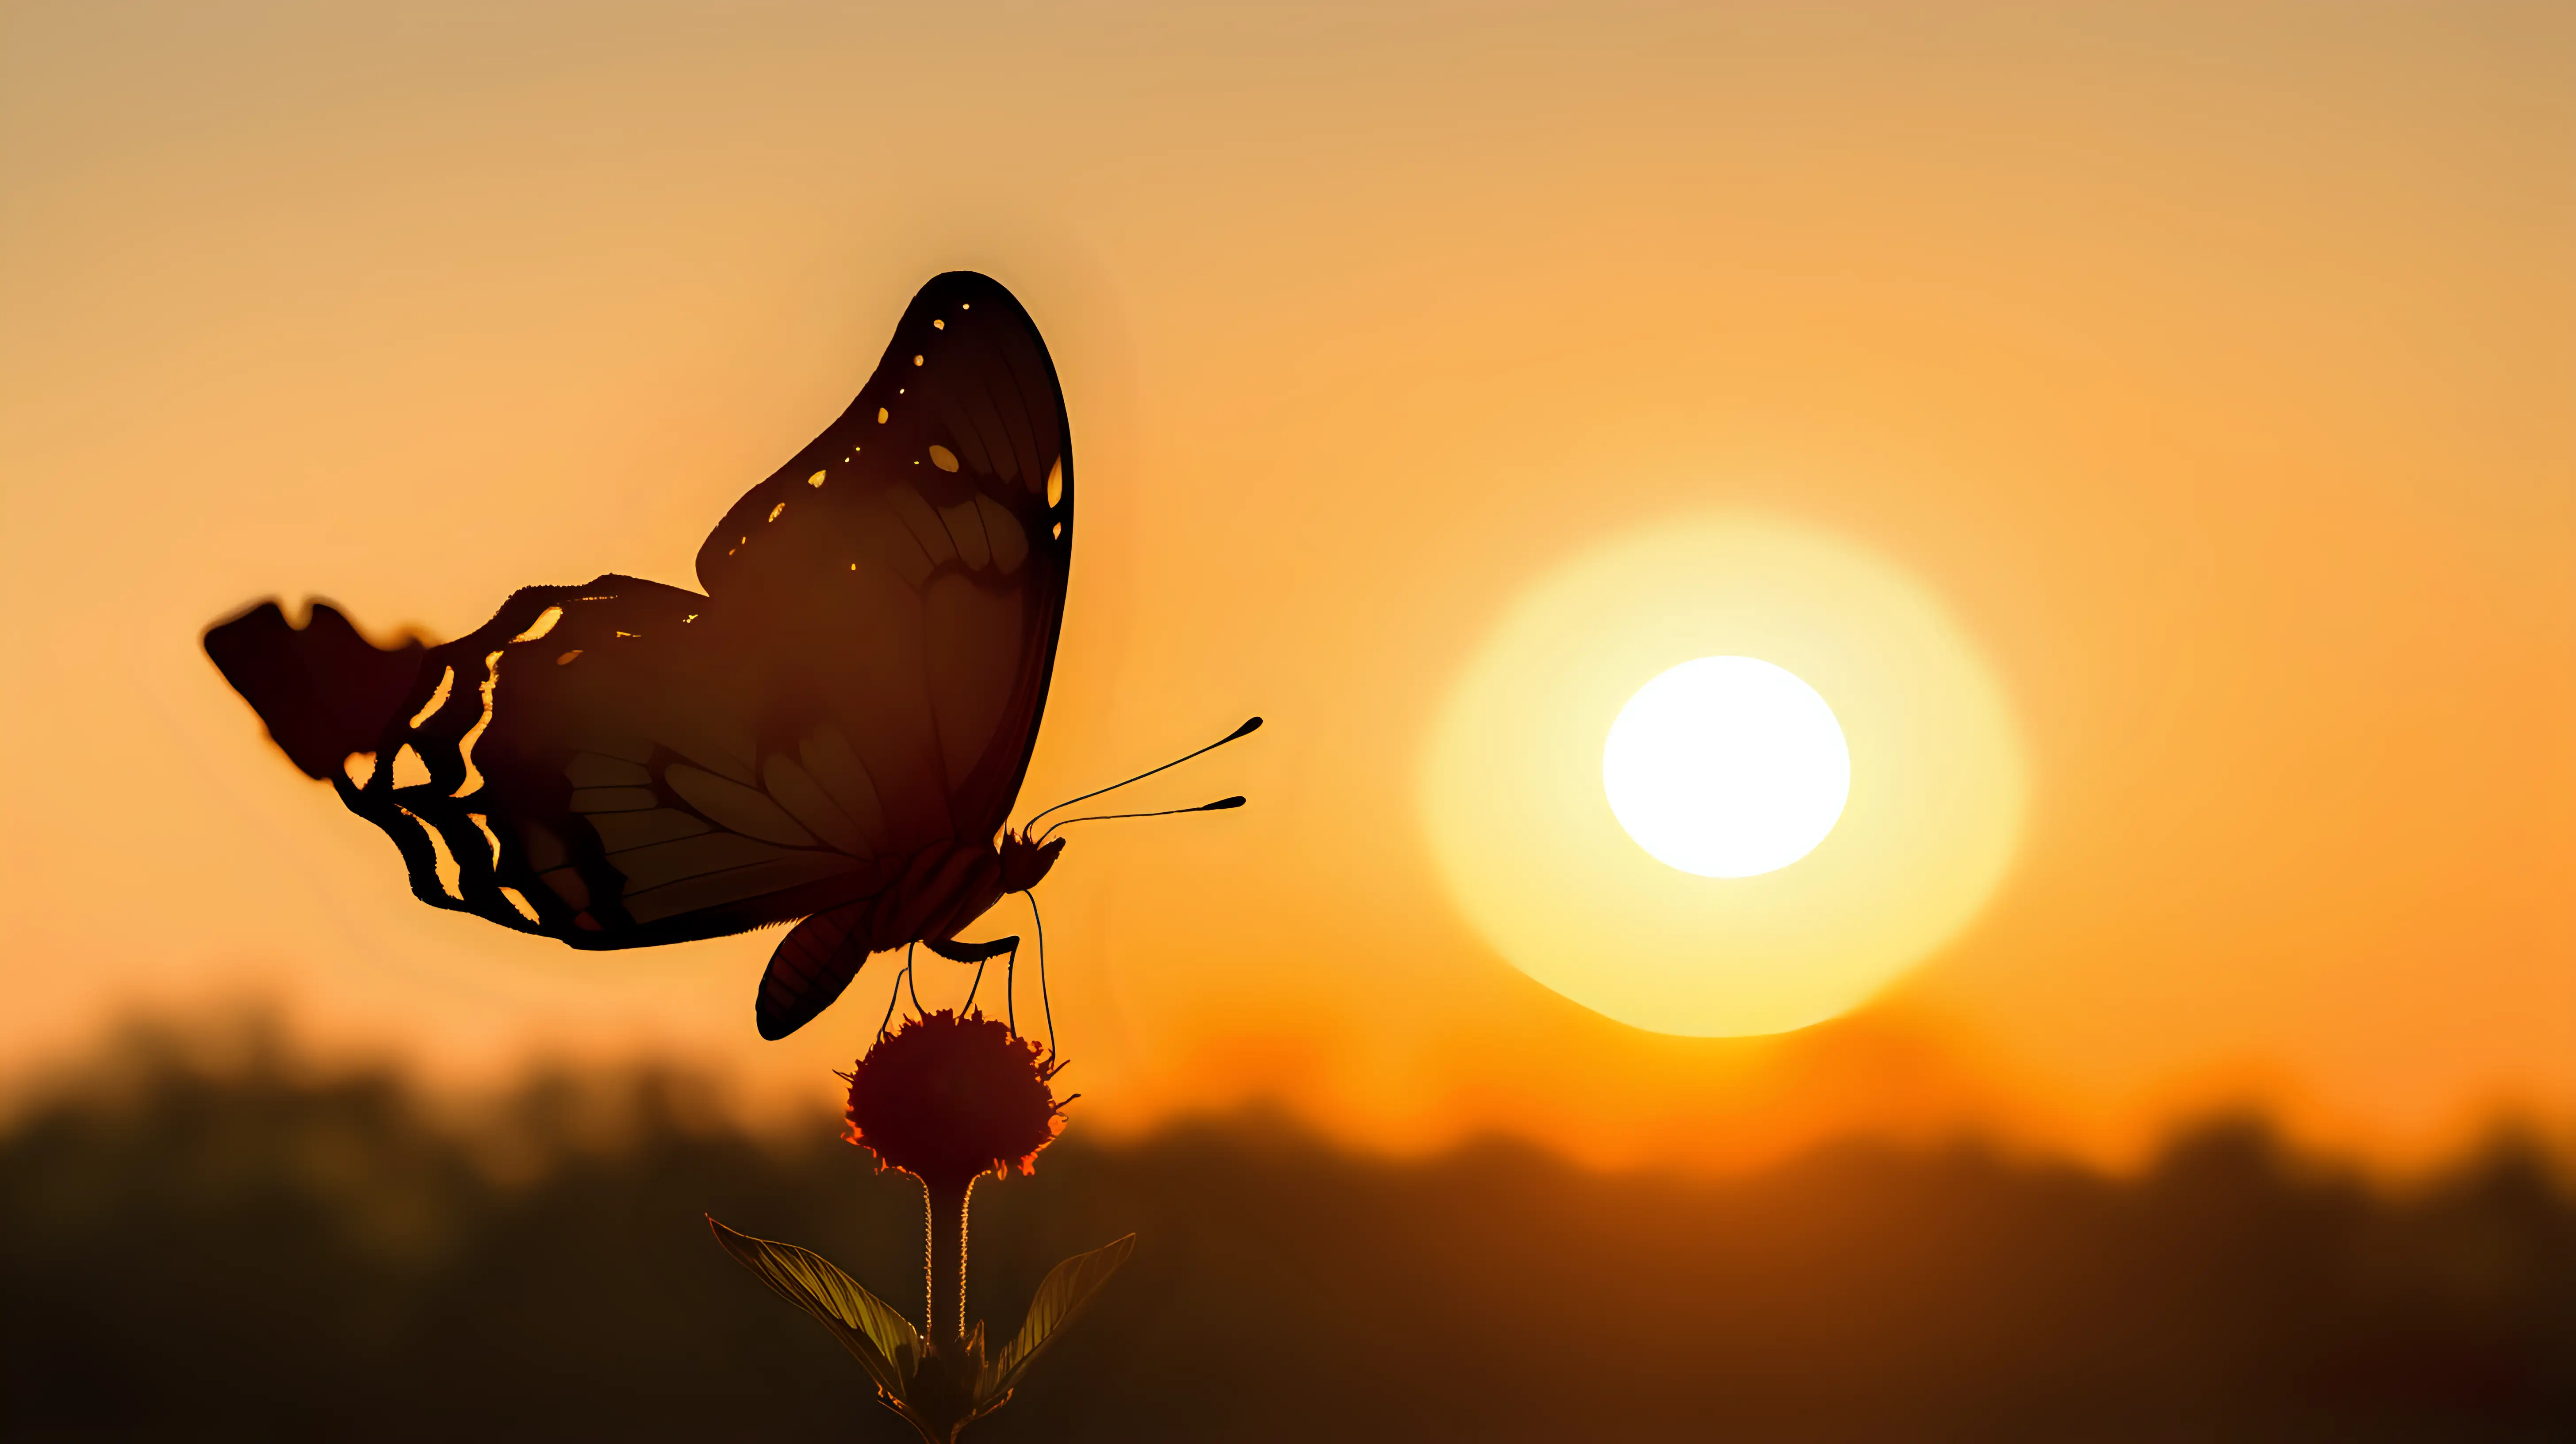 "In the golden hour light, capture the silhouette of a butterfly against the setting sun, capturing the essence of tranquility and serenity."